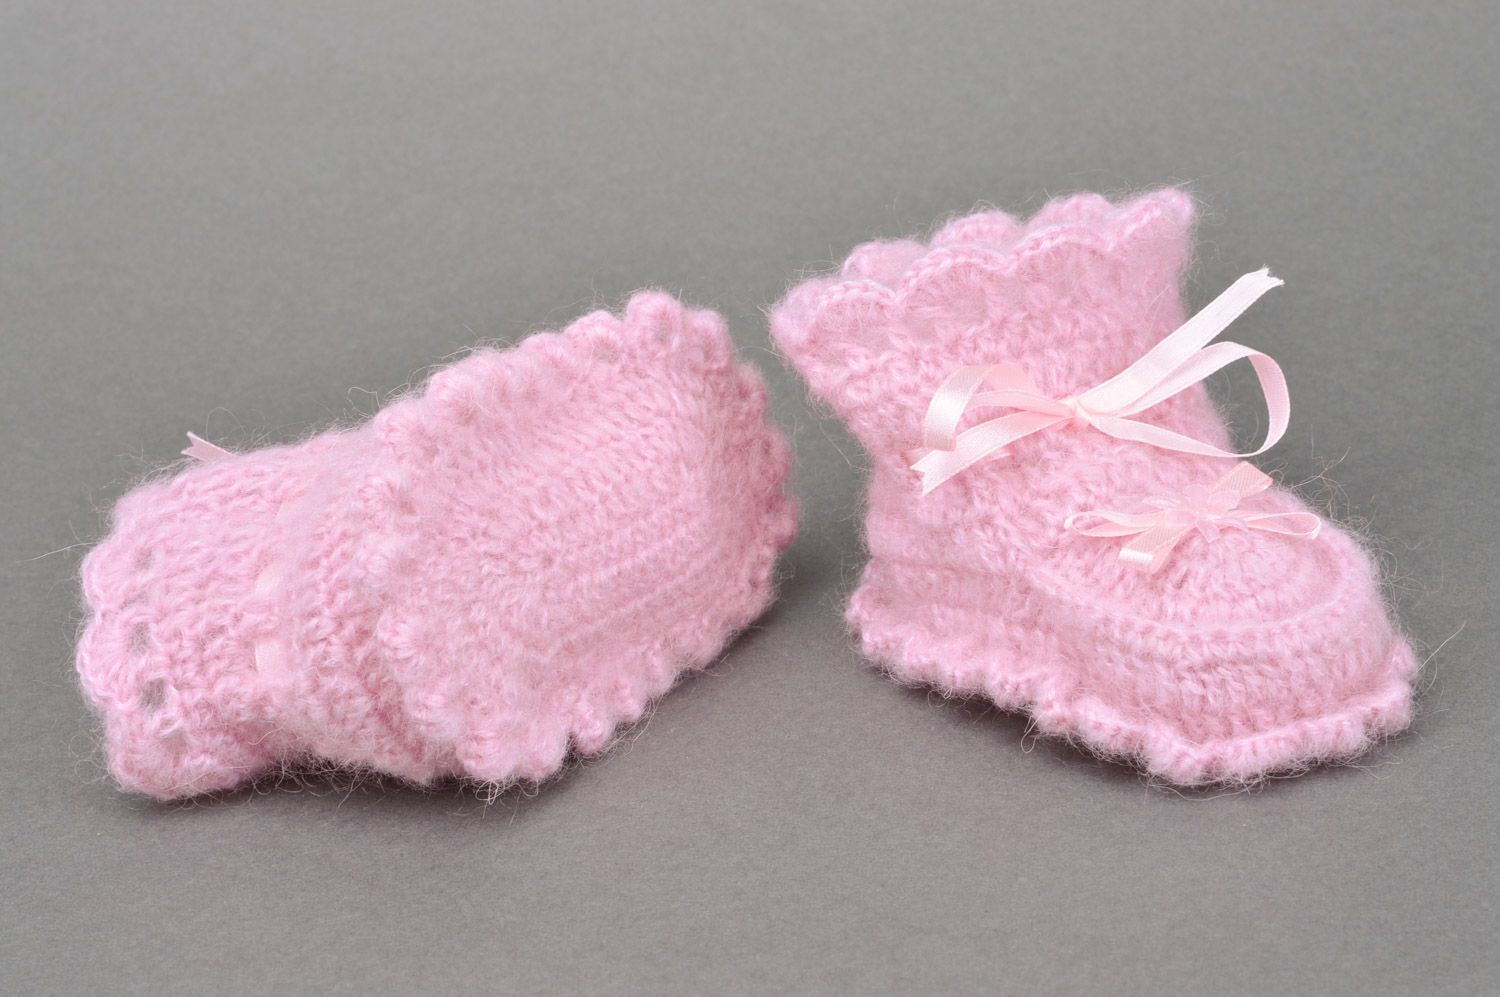 Handmade crocheted baby booties for girls made of angora in pink color with bows photo 5